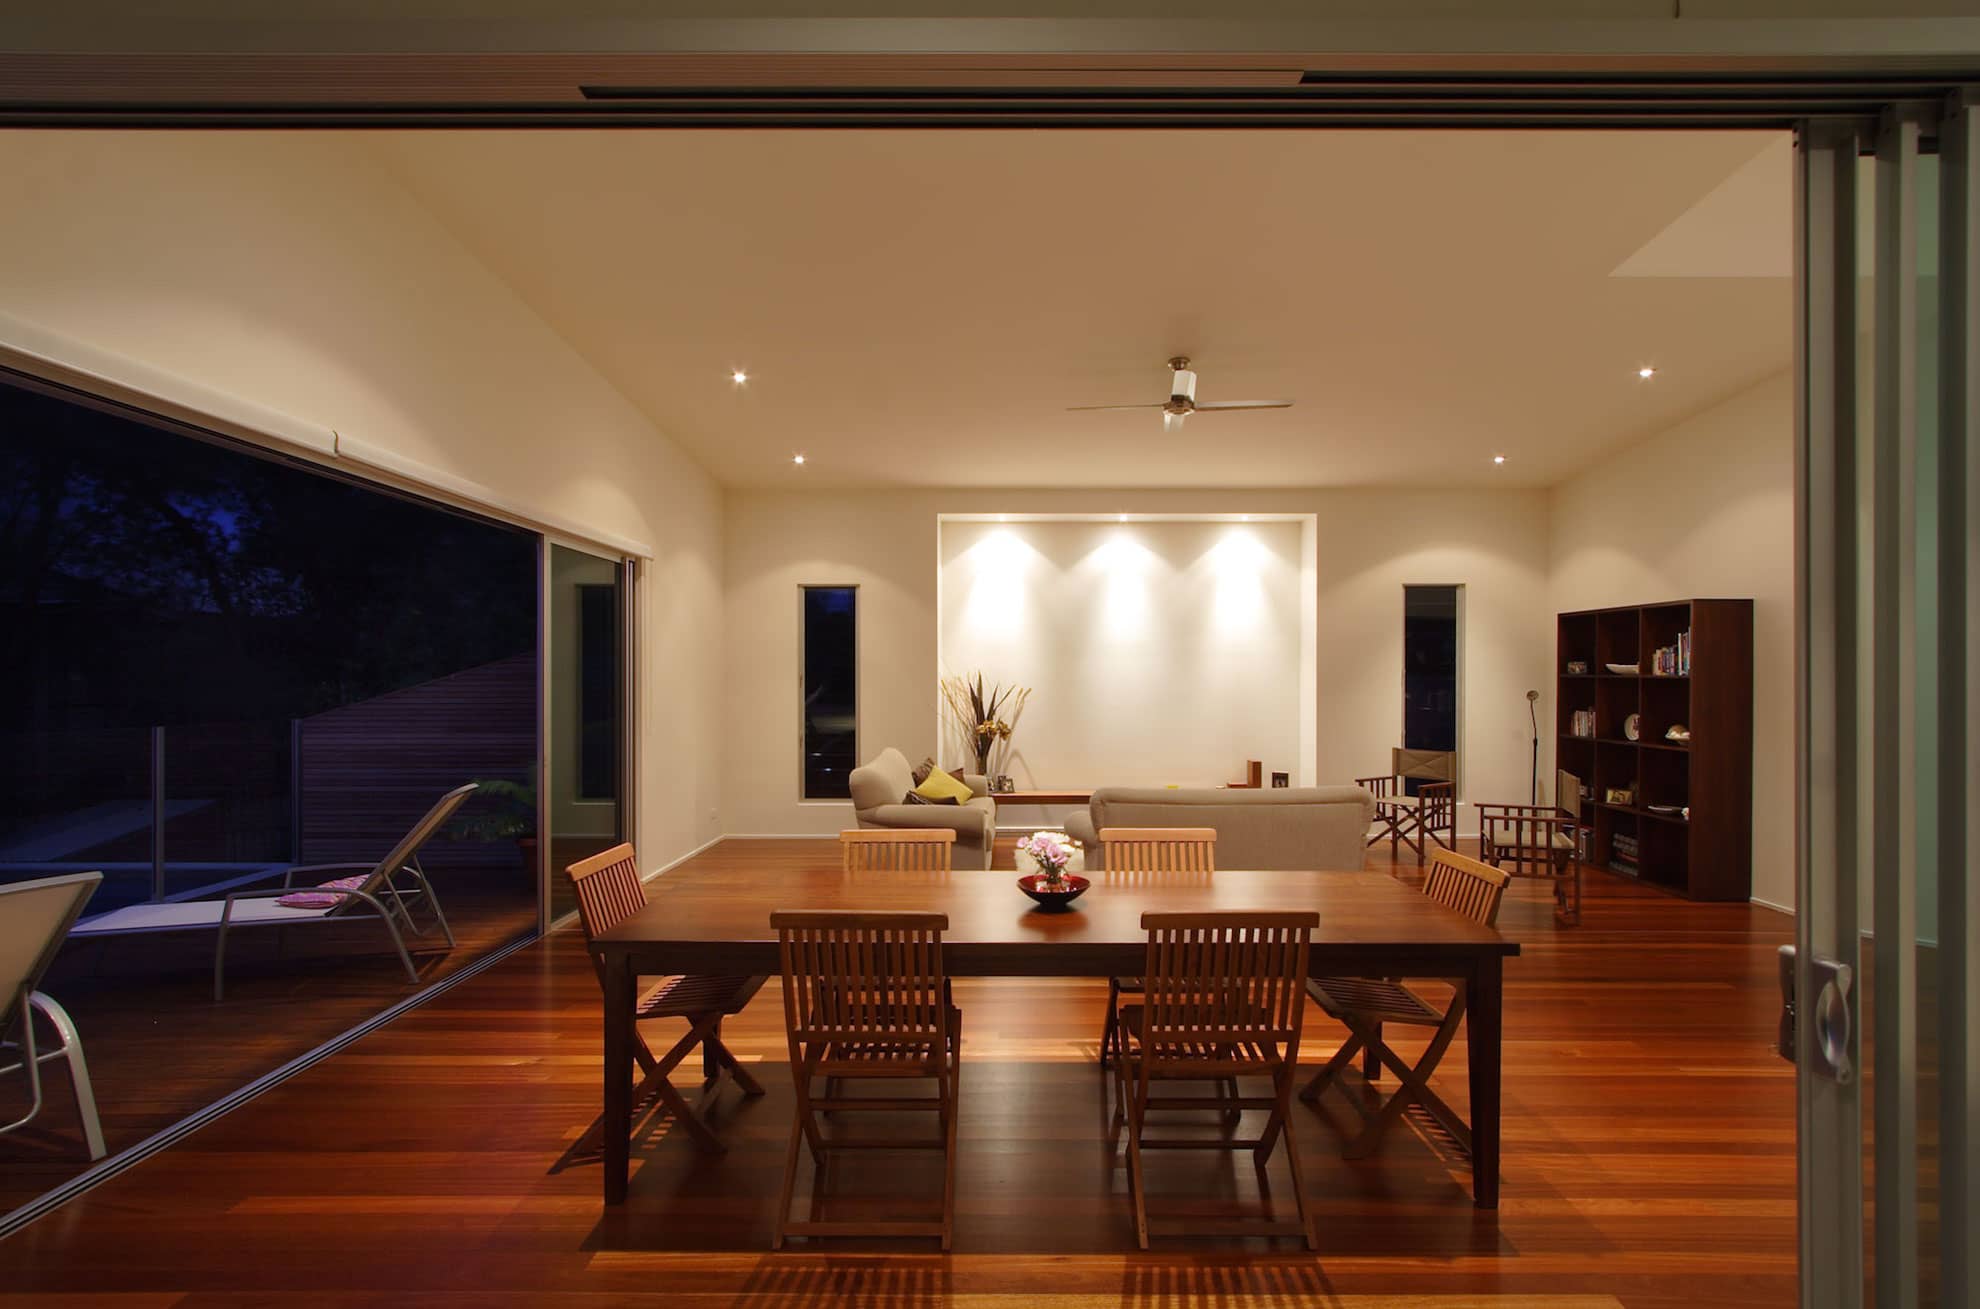 Oceania Crescent project by mdesign, a building design practice that operates on the Sunshine Coast.